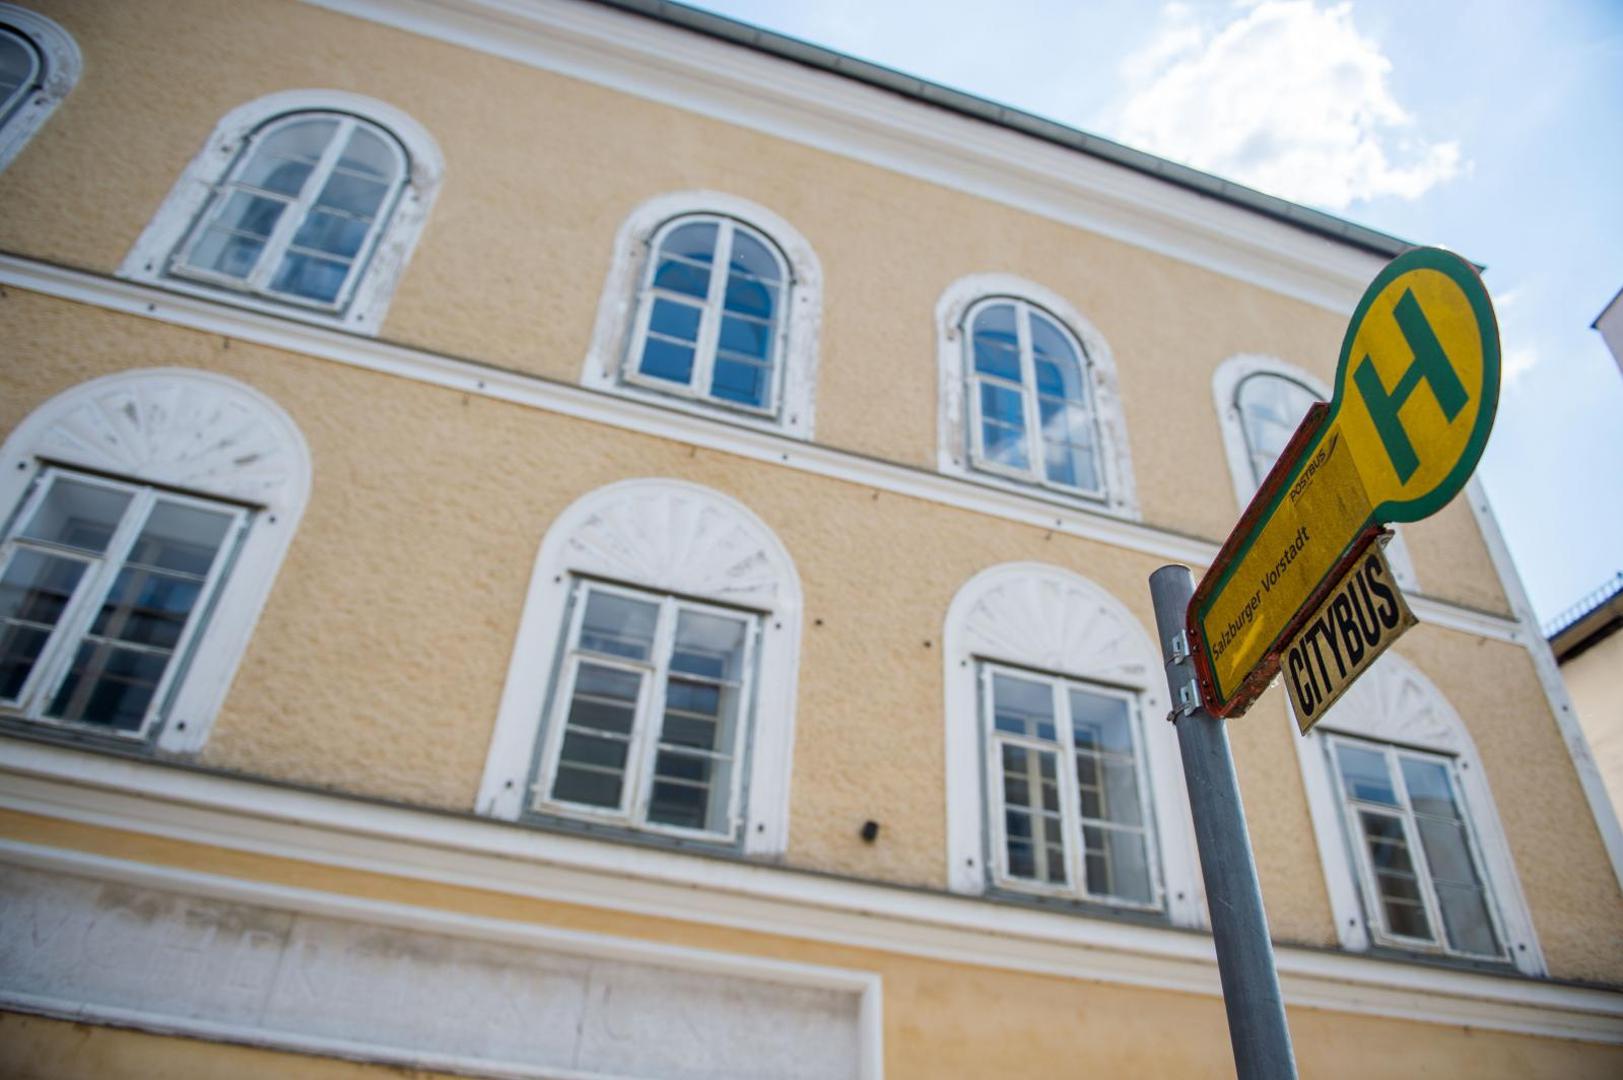 18 July 2018, Austria, Braunau am Inn: Adolf Hitler's birthplace. In front of the house is a bus stop sign. Photo: Lino Mirgeler/dpa /DPA/PIXSELL